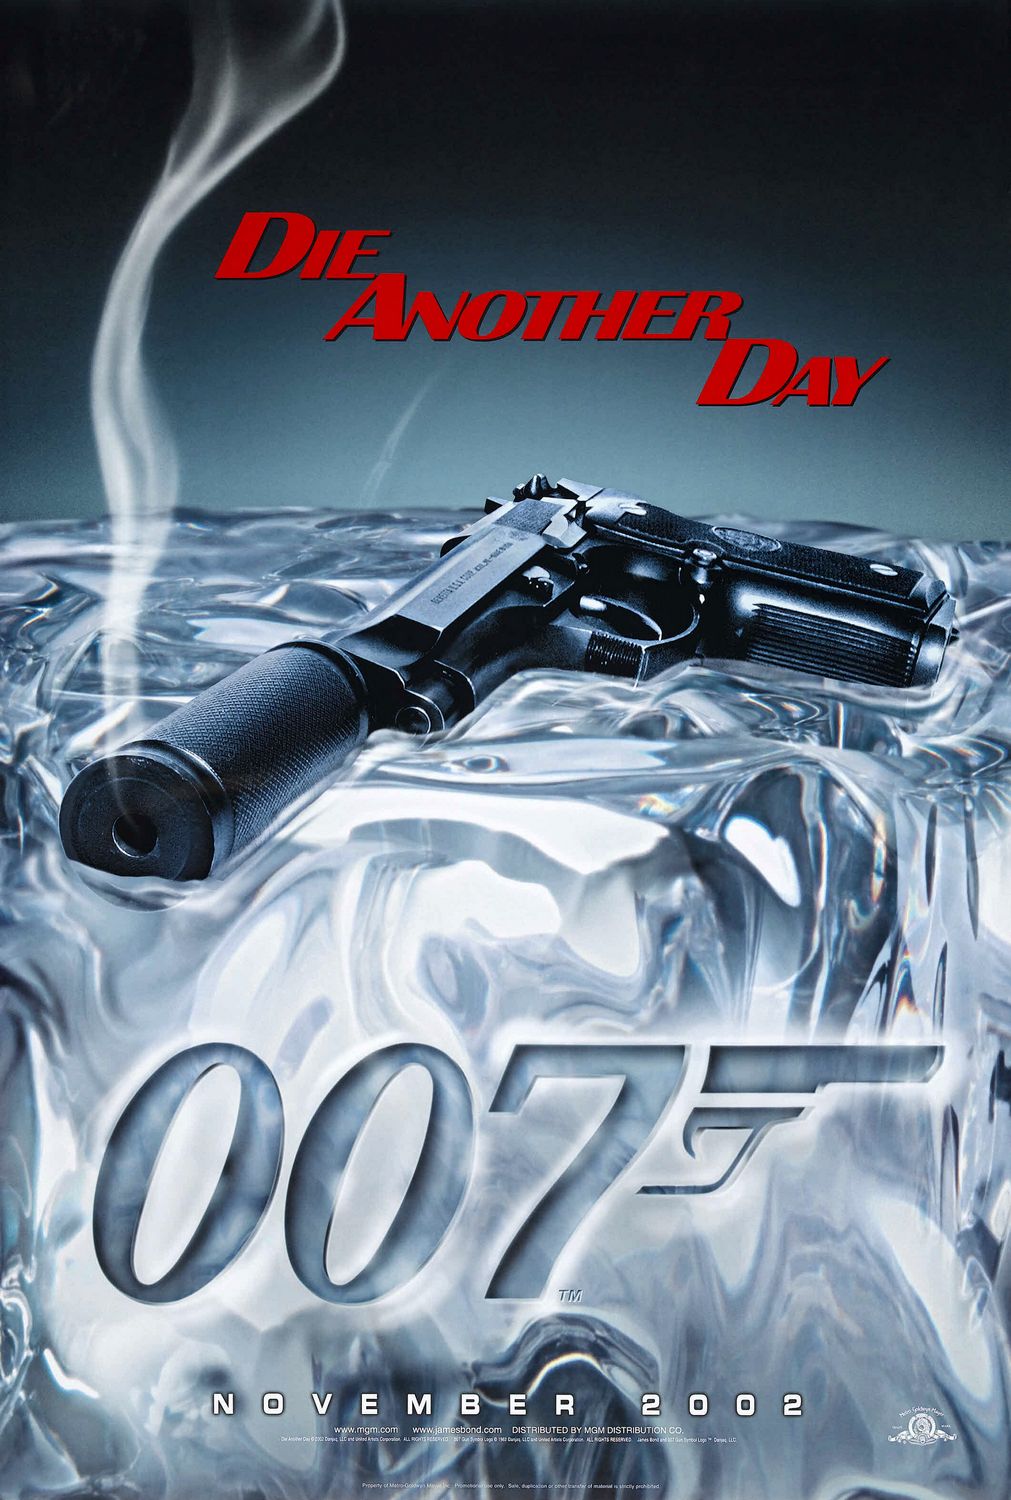 die_another_day_ver1_xlg.jpg